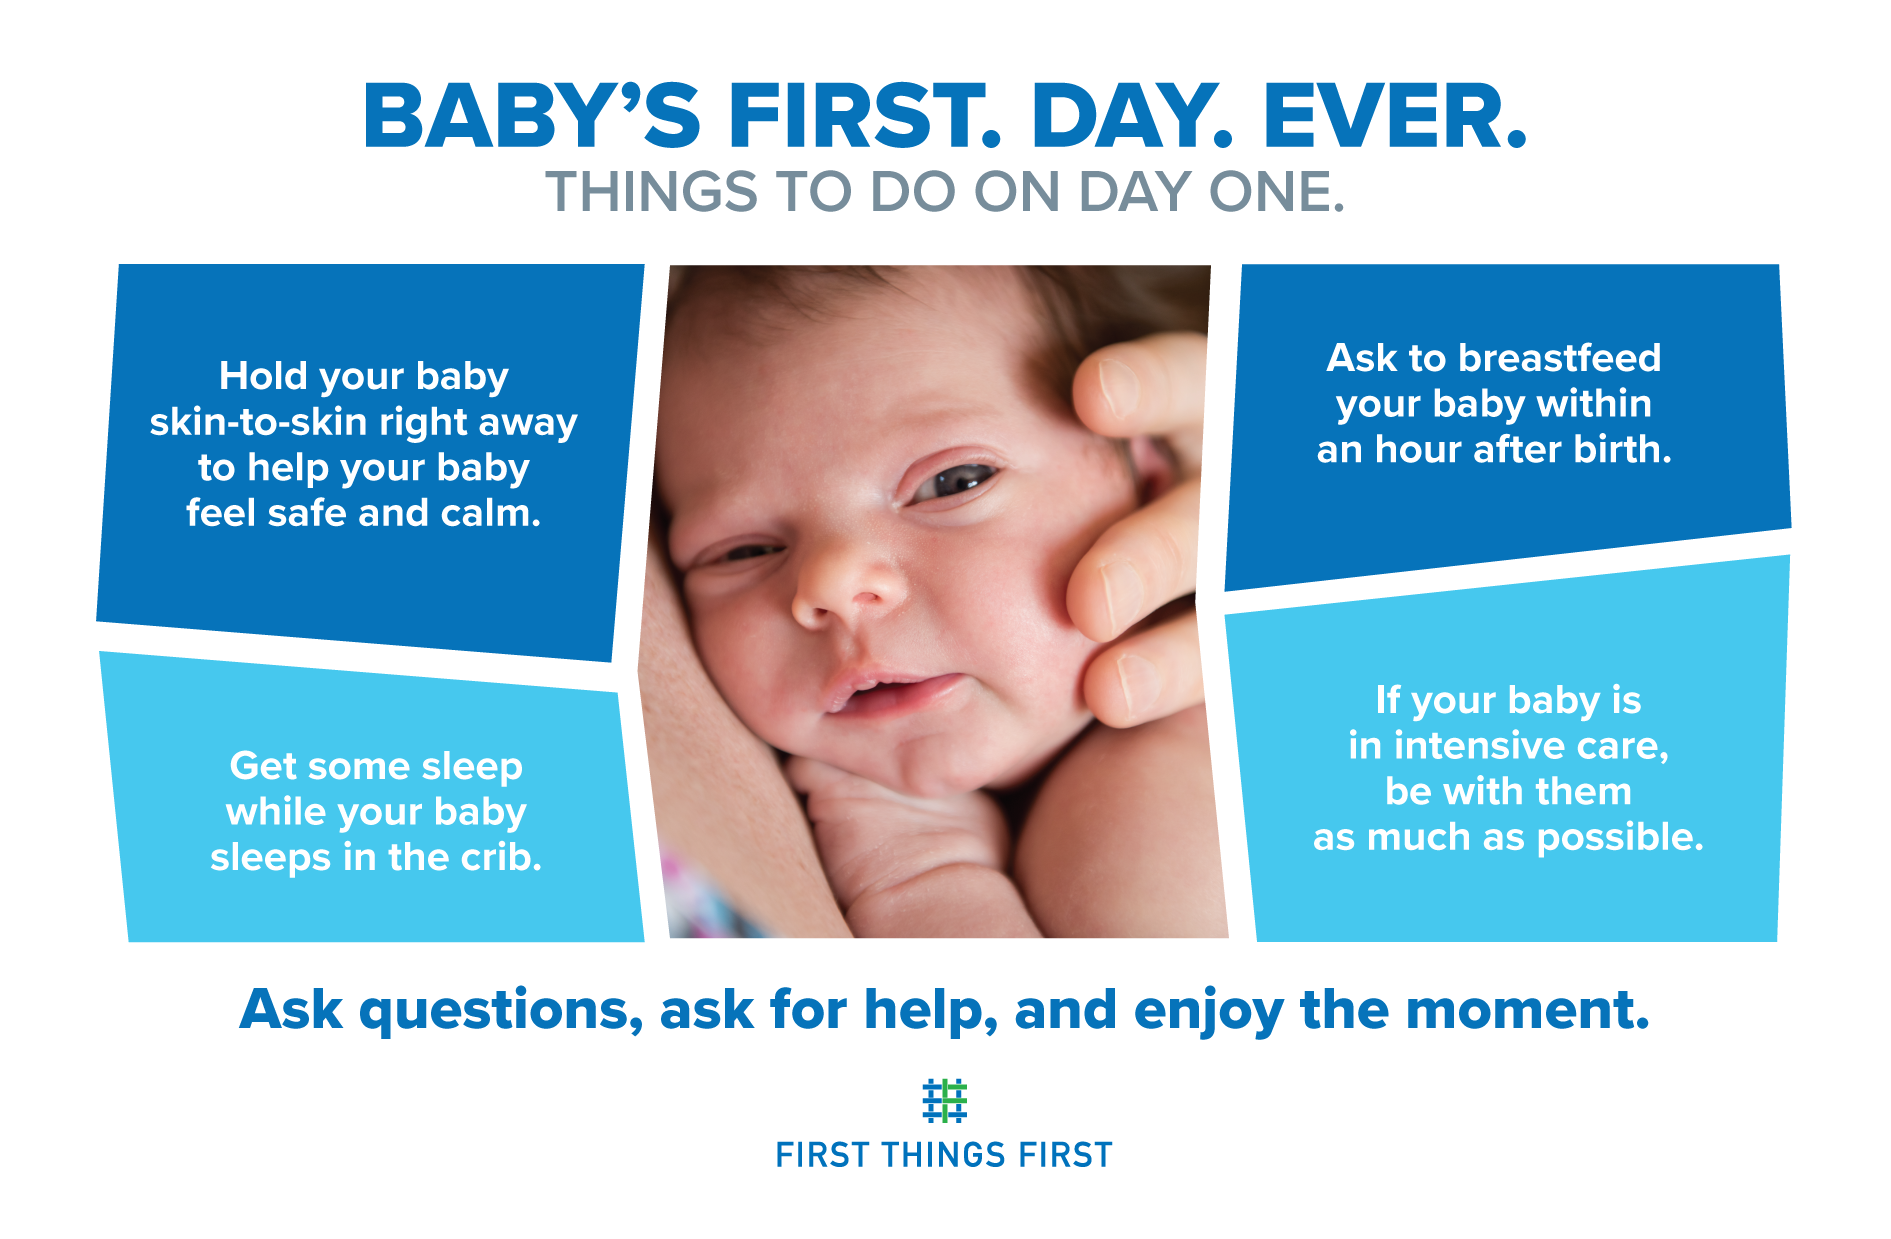 What to do on baby's first day